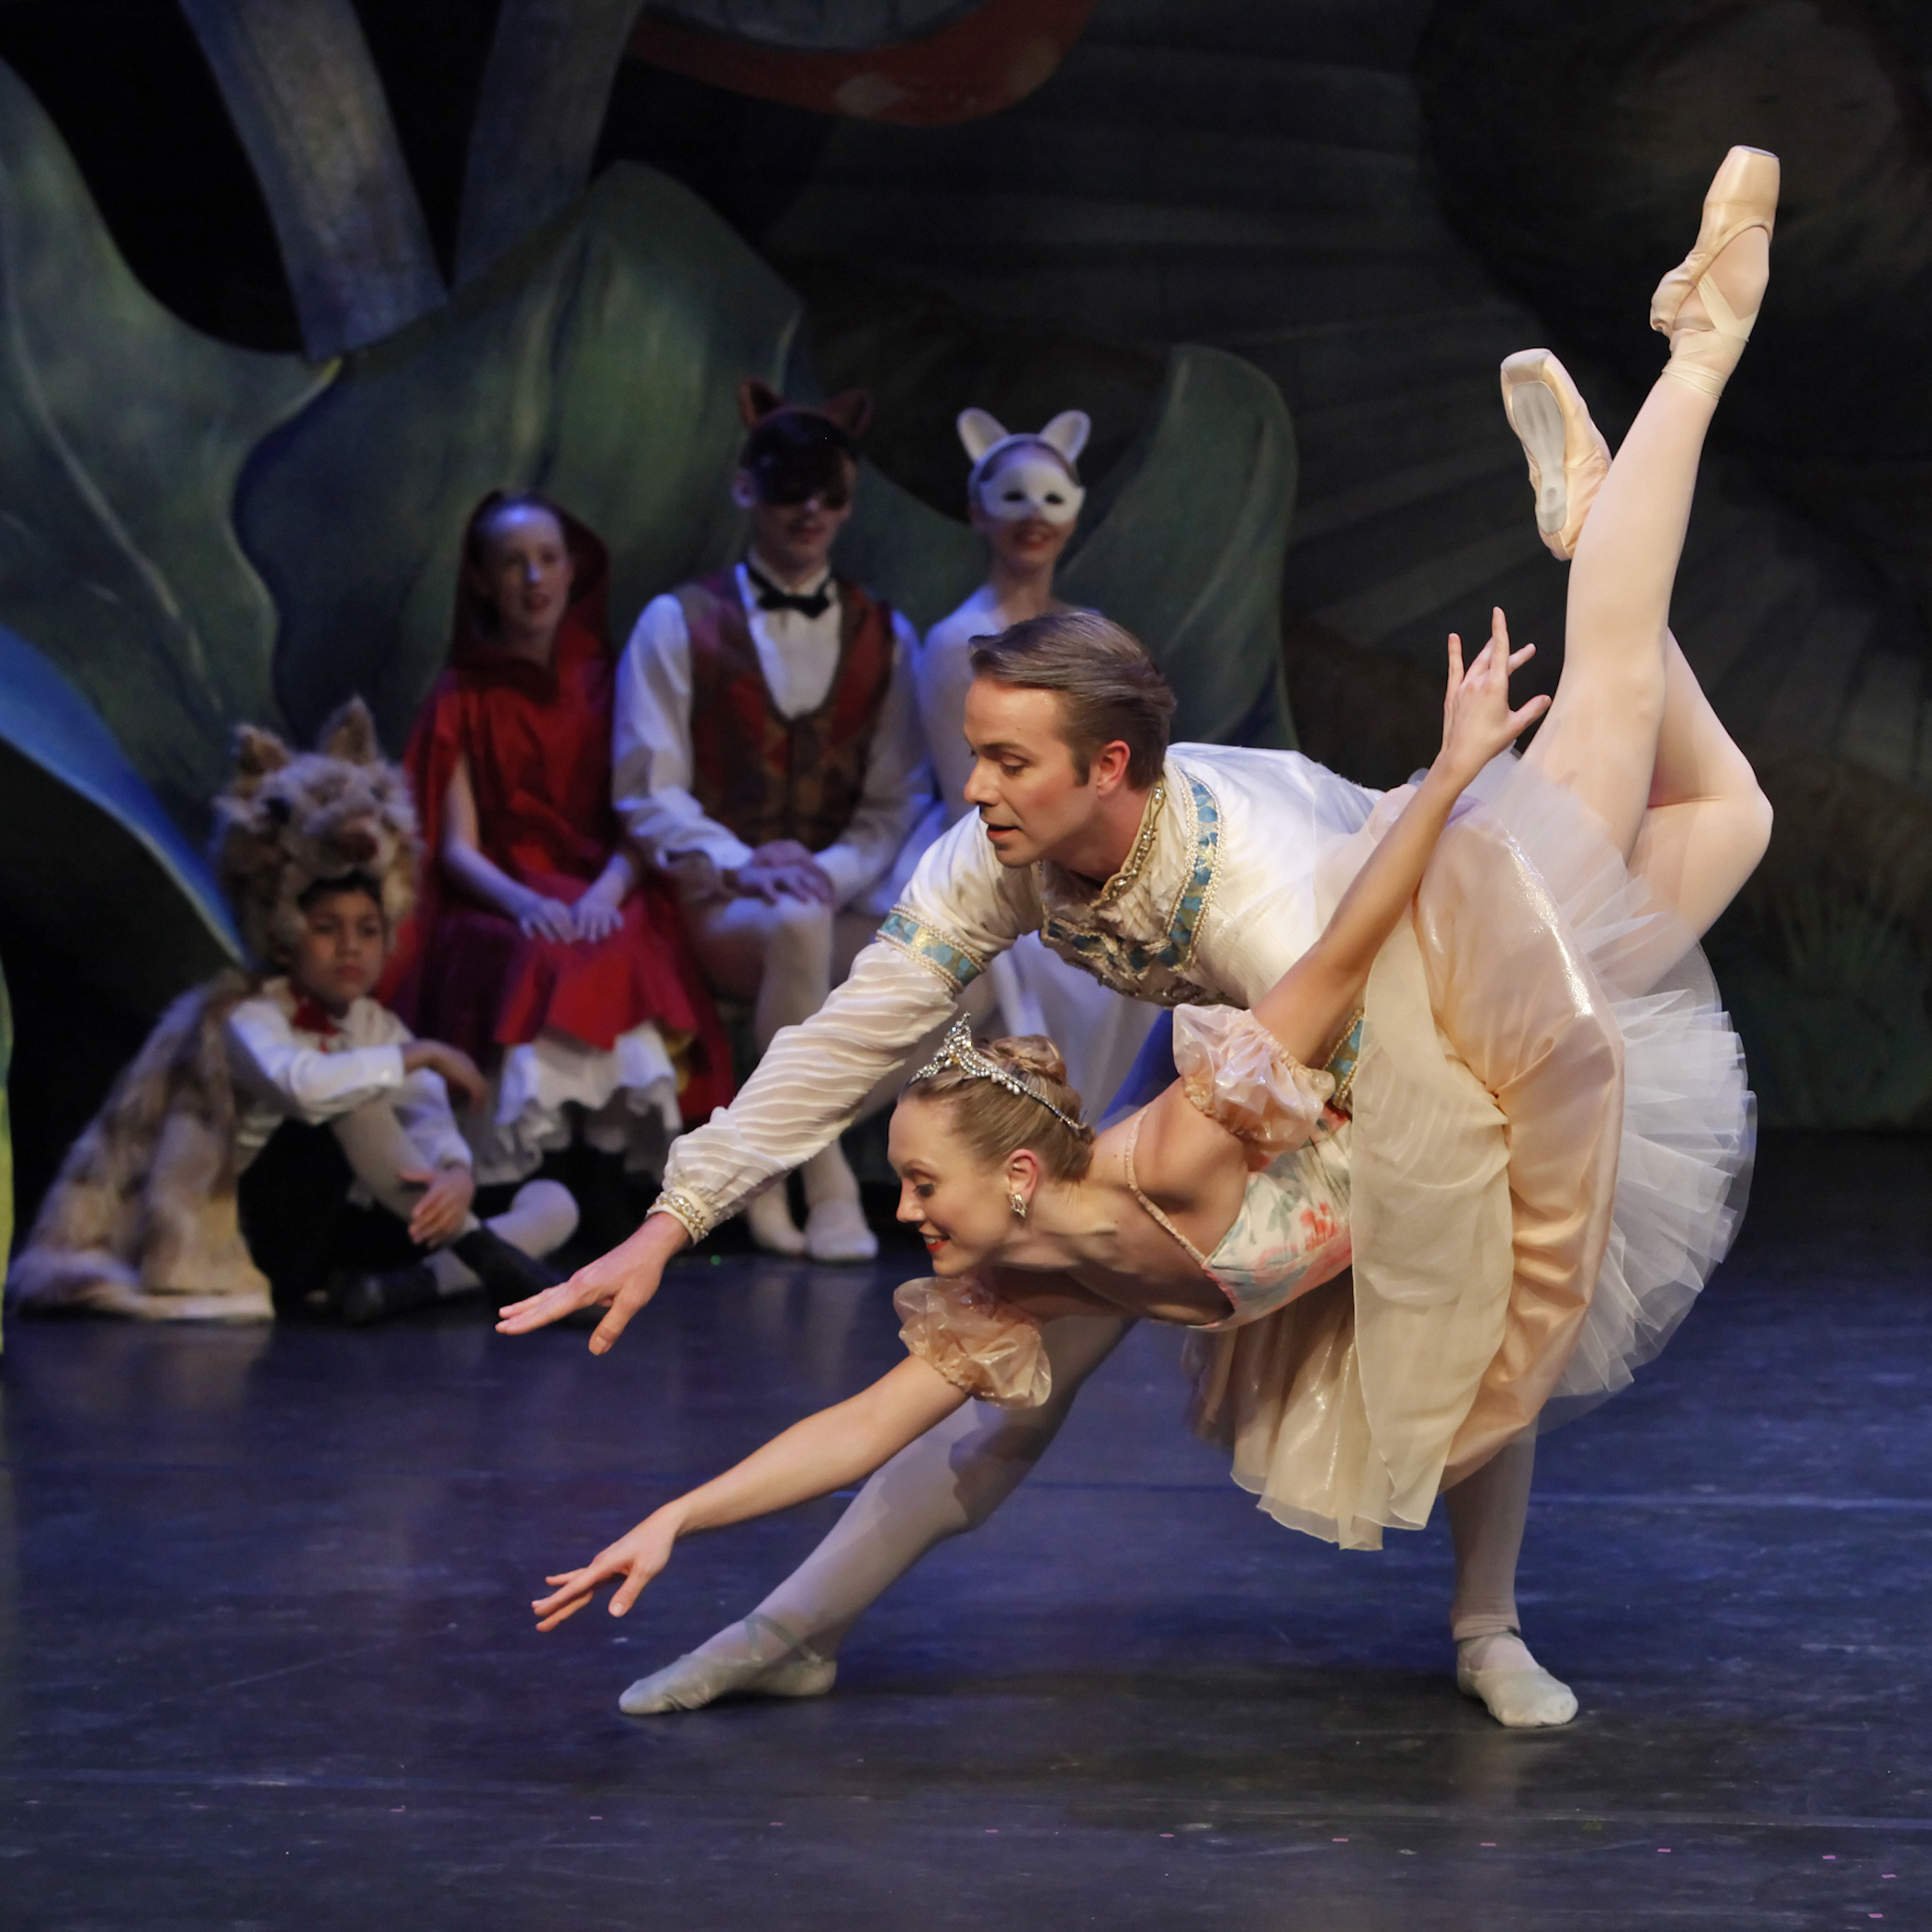 Photo: TERENCE DUNCAN &amp; ELENA ZAHLMANN in "SLEEPING BEAUTY"; Dress rehearsal photographed: Friday, February 6, 2009;  3:30 PM at Florence Gould Hall; New York, NY. Photograph: © 2009 Richard Termine (for The New York Times).
Photo Credit: Photo by Richard Termine for The New York Times